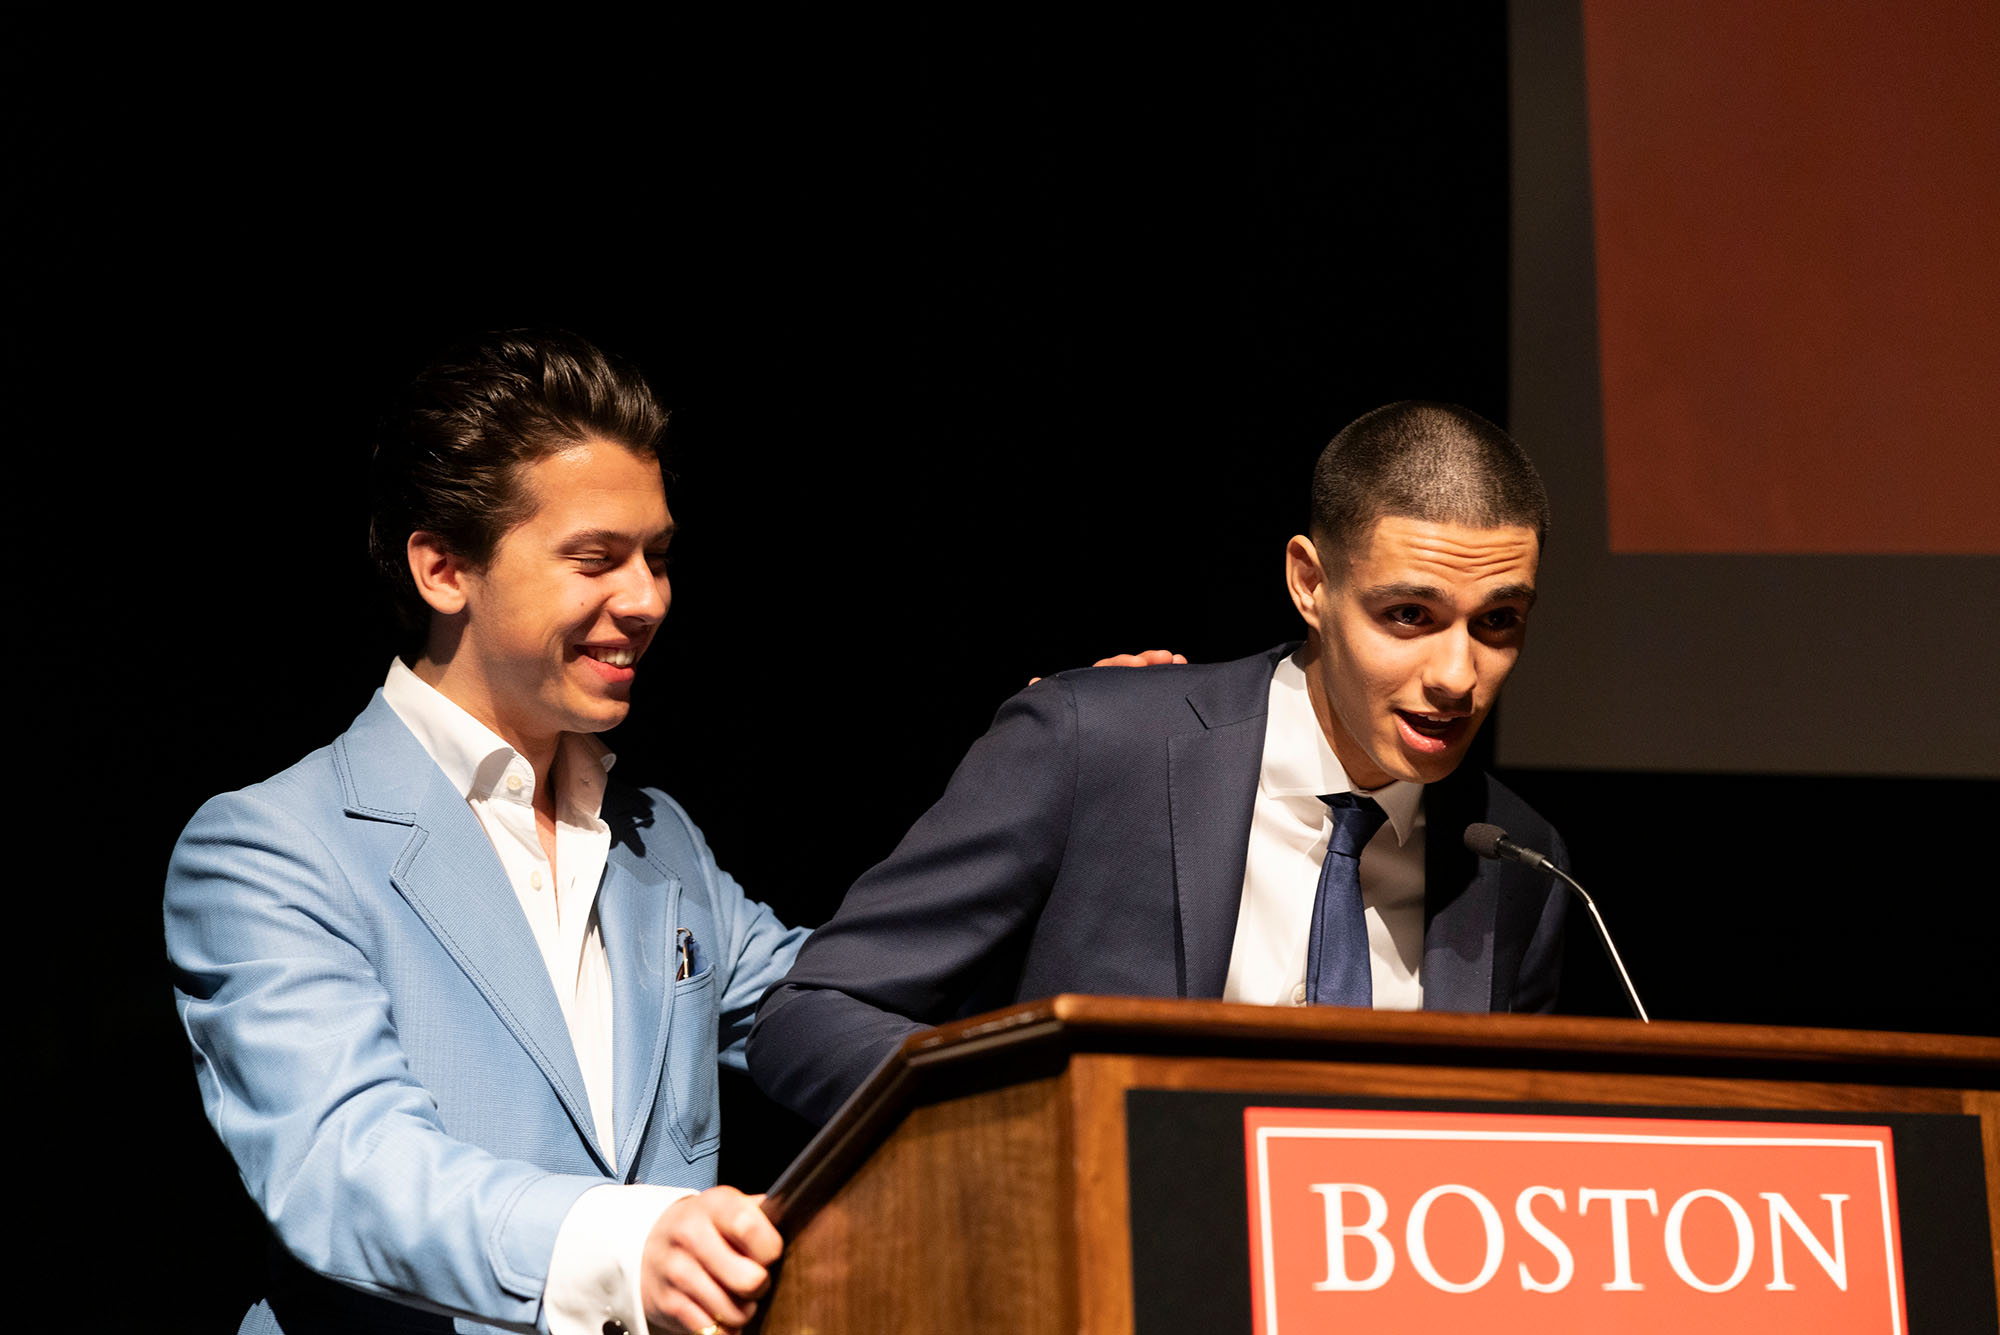 Photo: A picture of two men at a podium that says "Boston University"